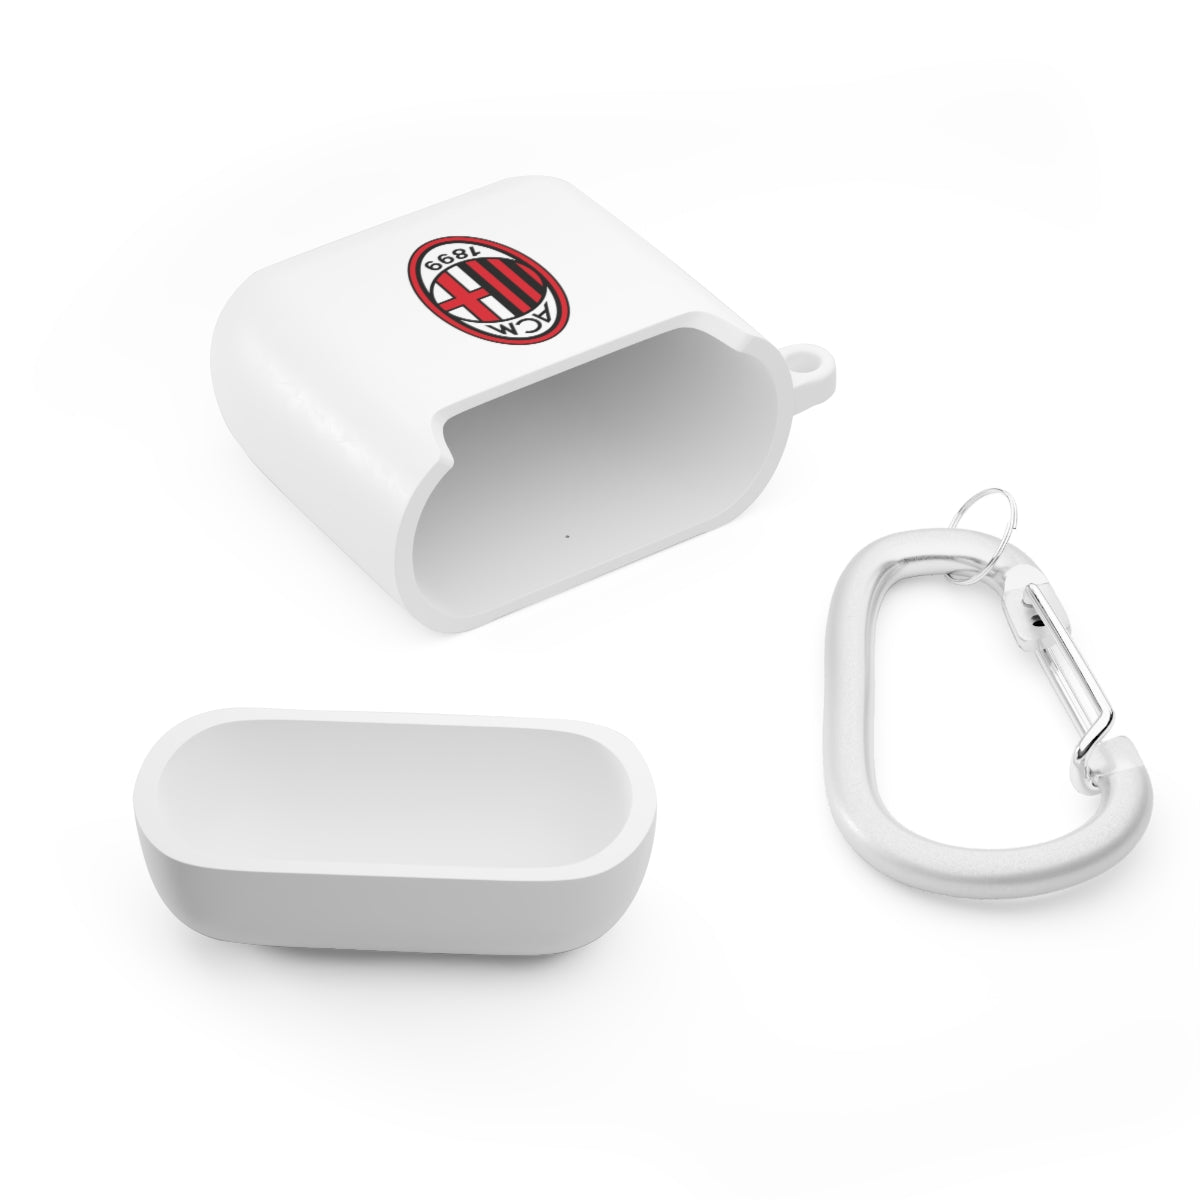 AC Milan AirPods and AirPods Pro Case Cover